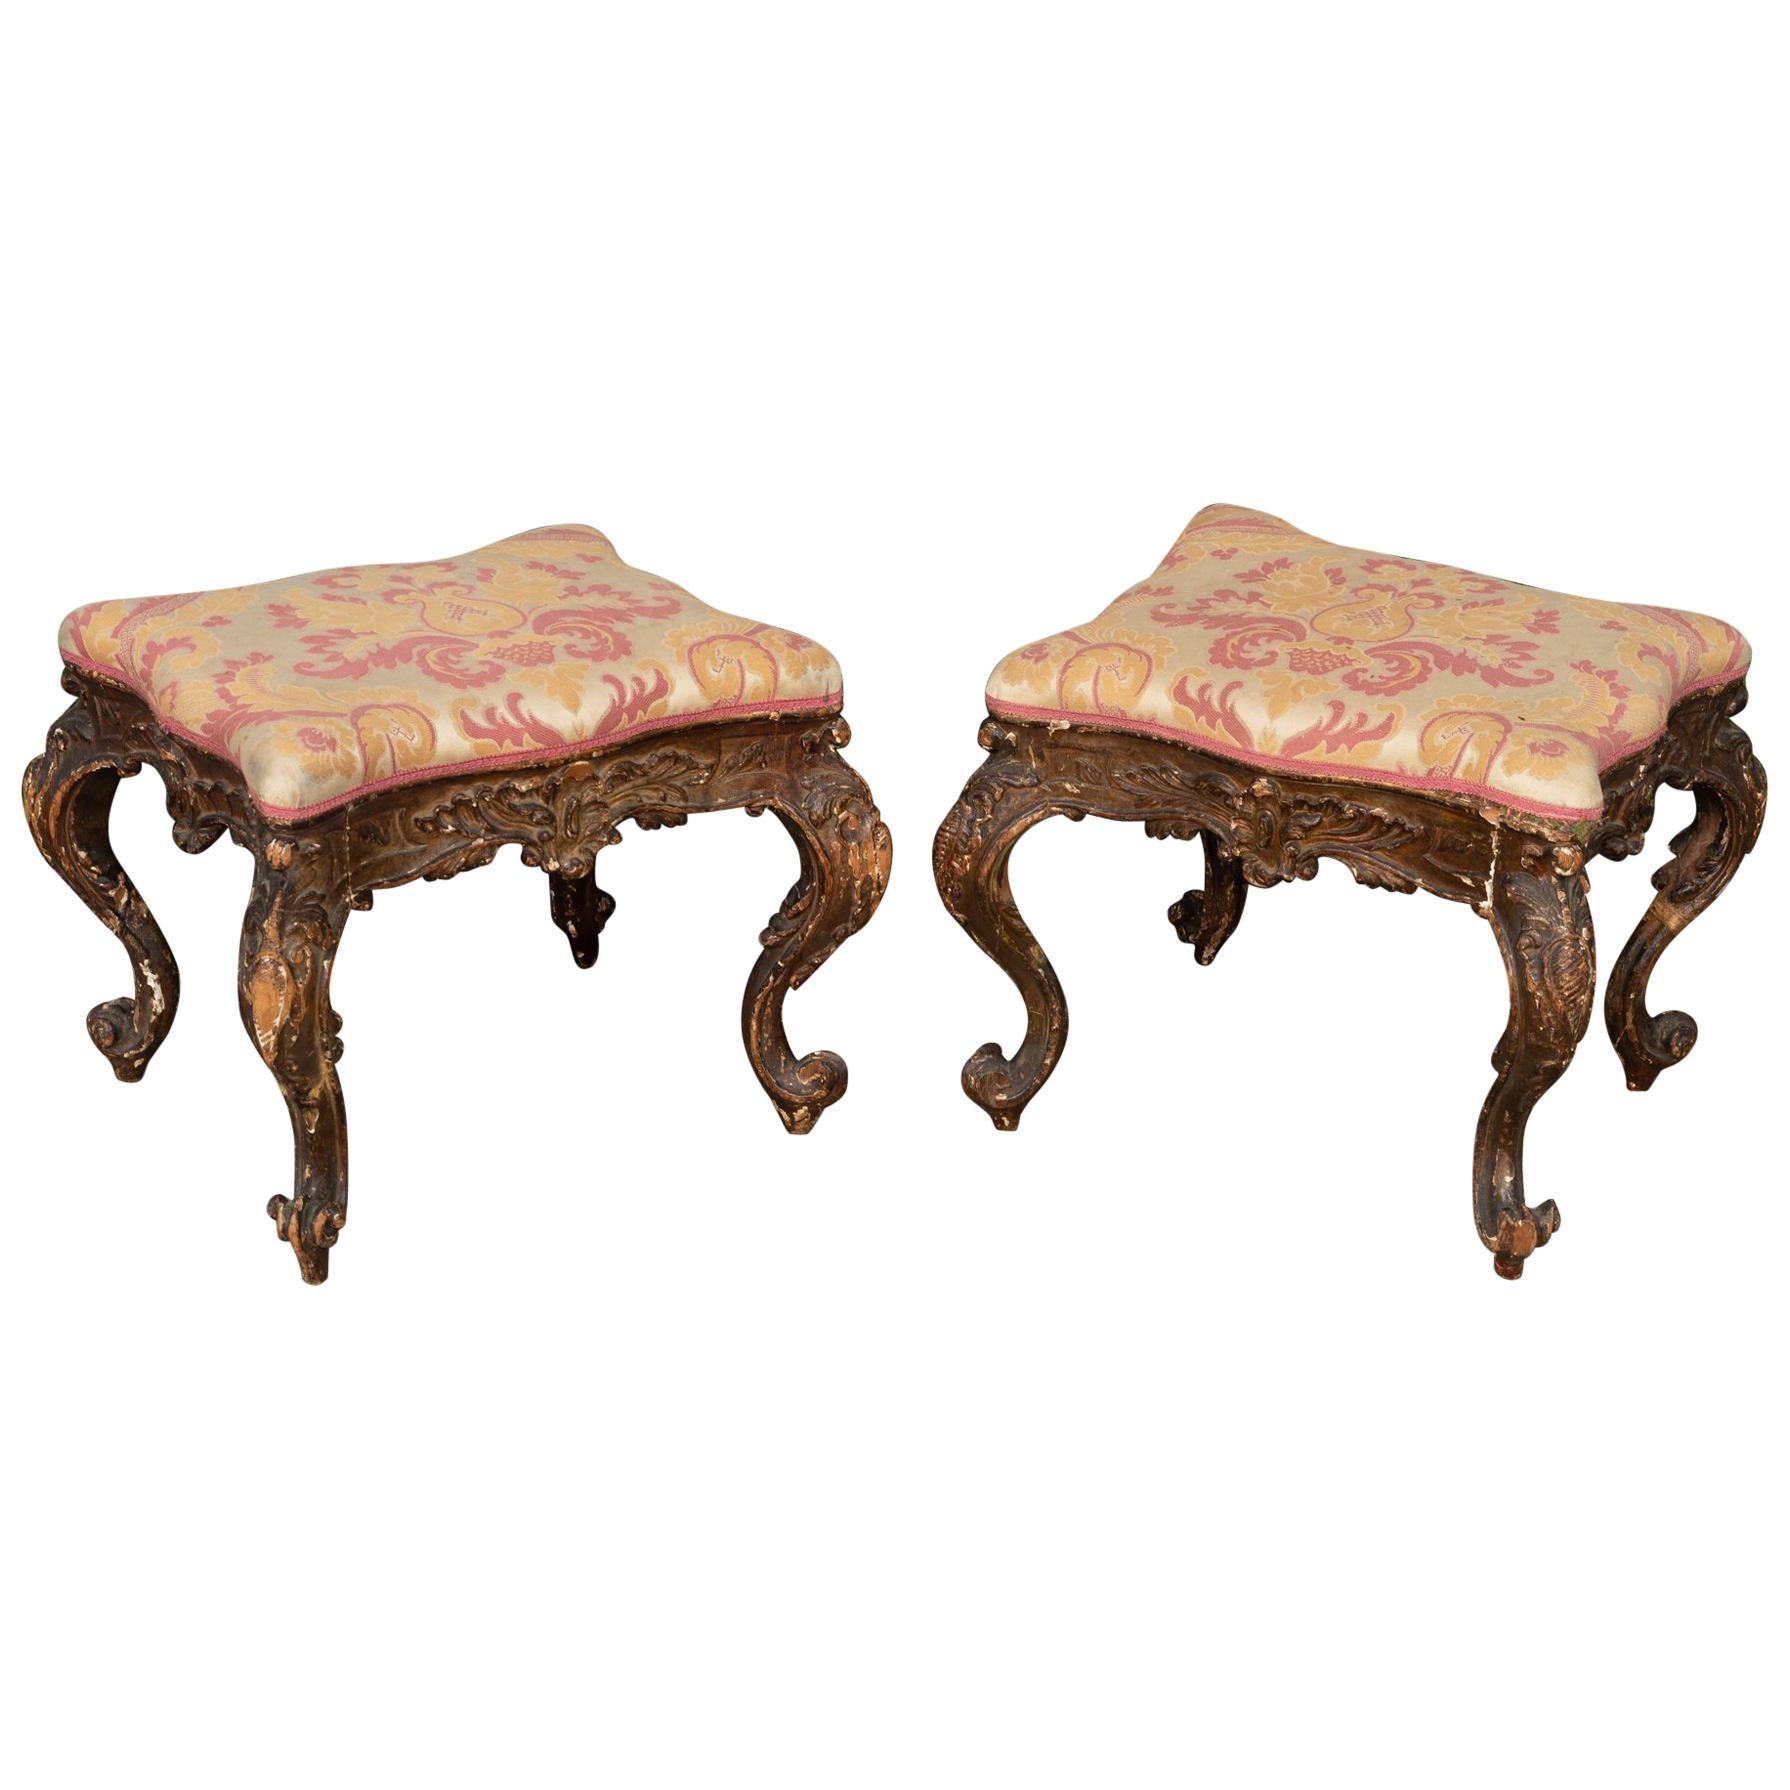 Pair of 18th Century Carved Italian Benches